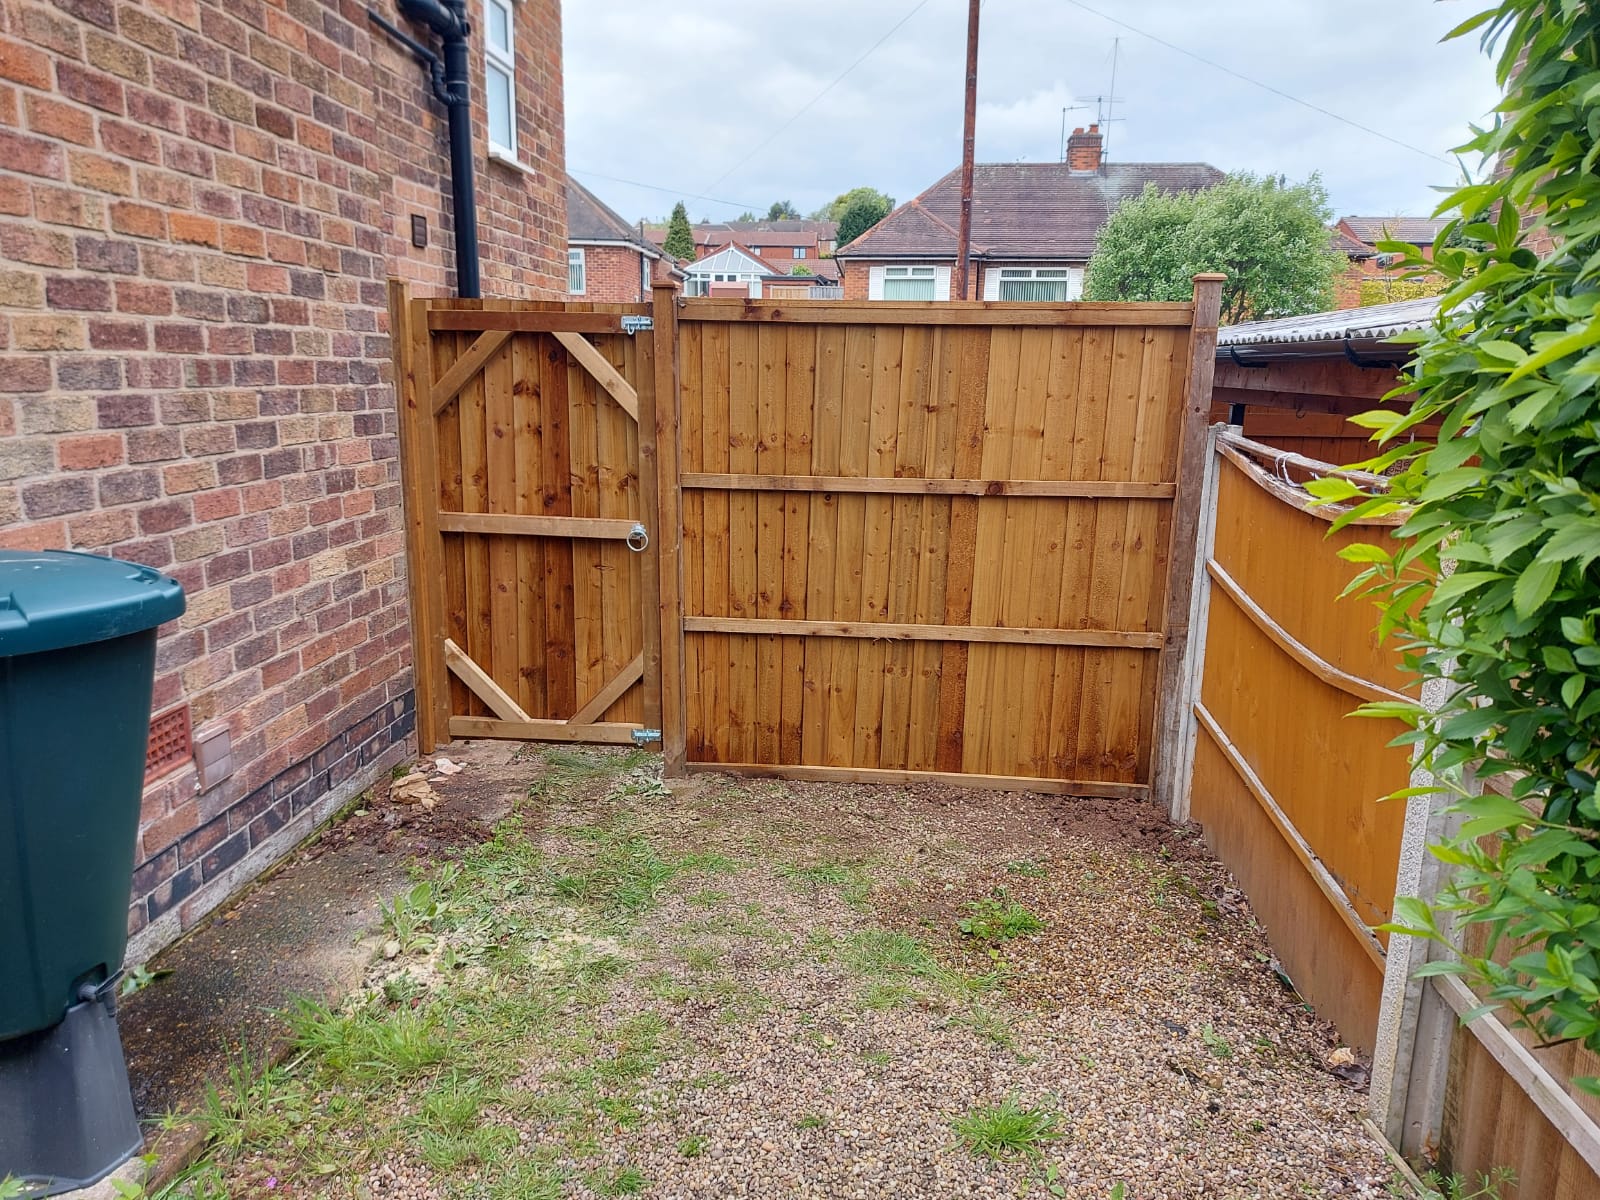 Fencing York wide wooden garden gate with fencing from inside